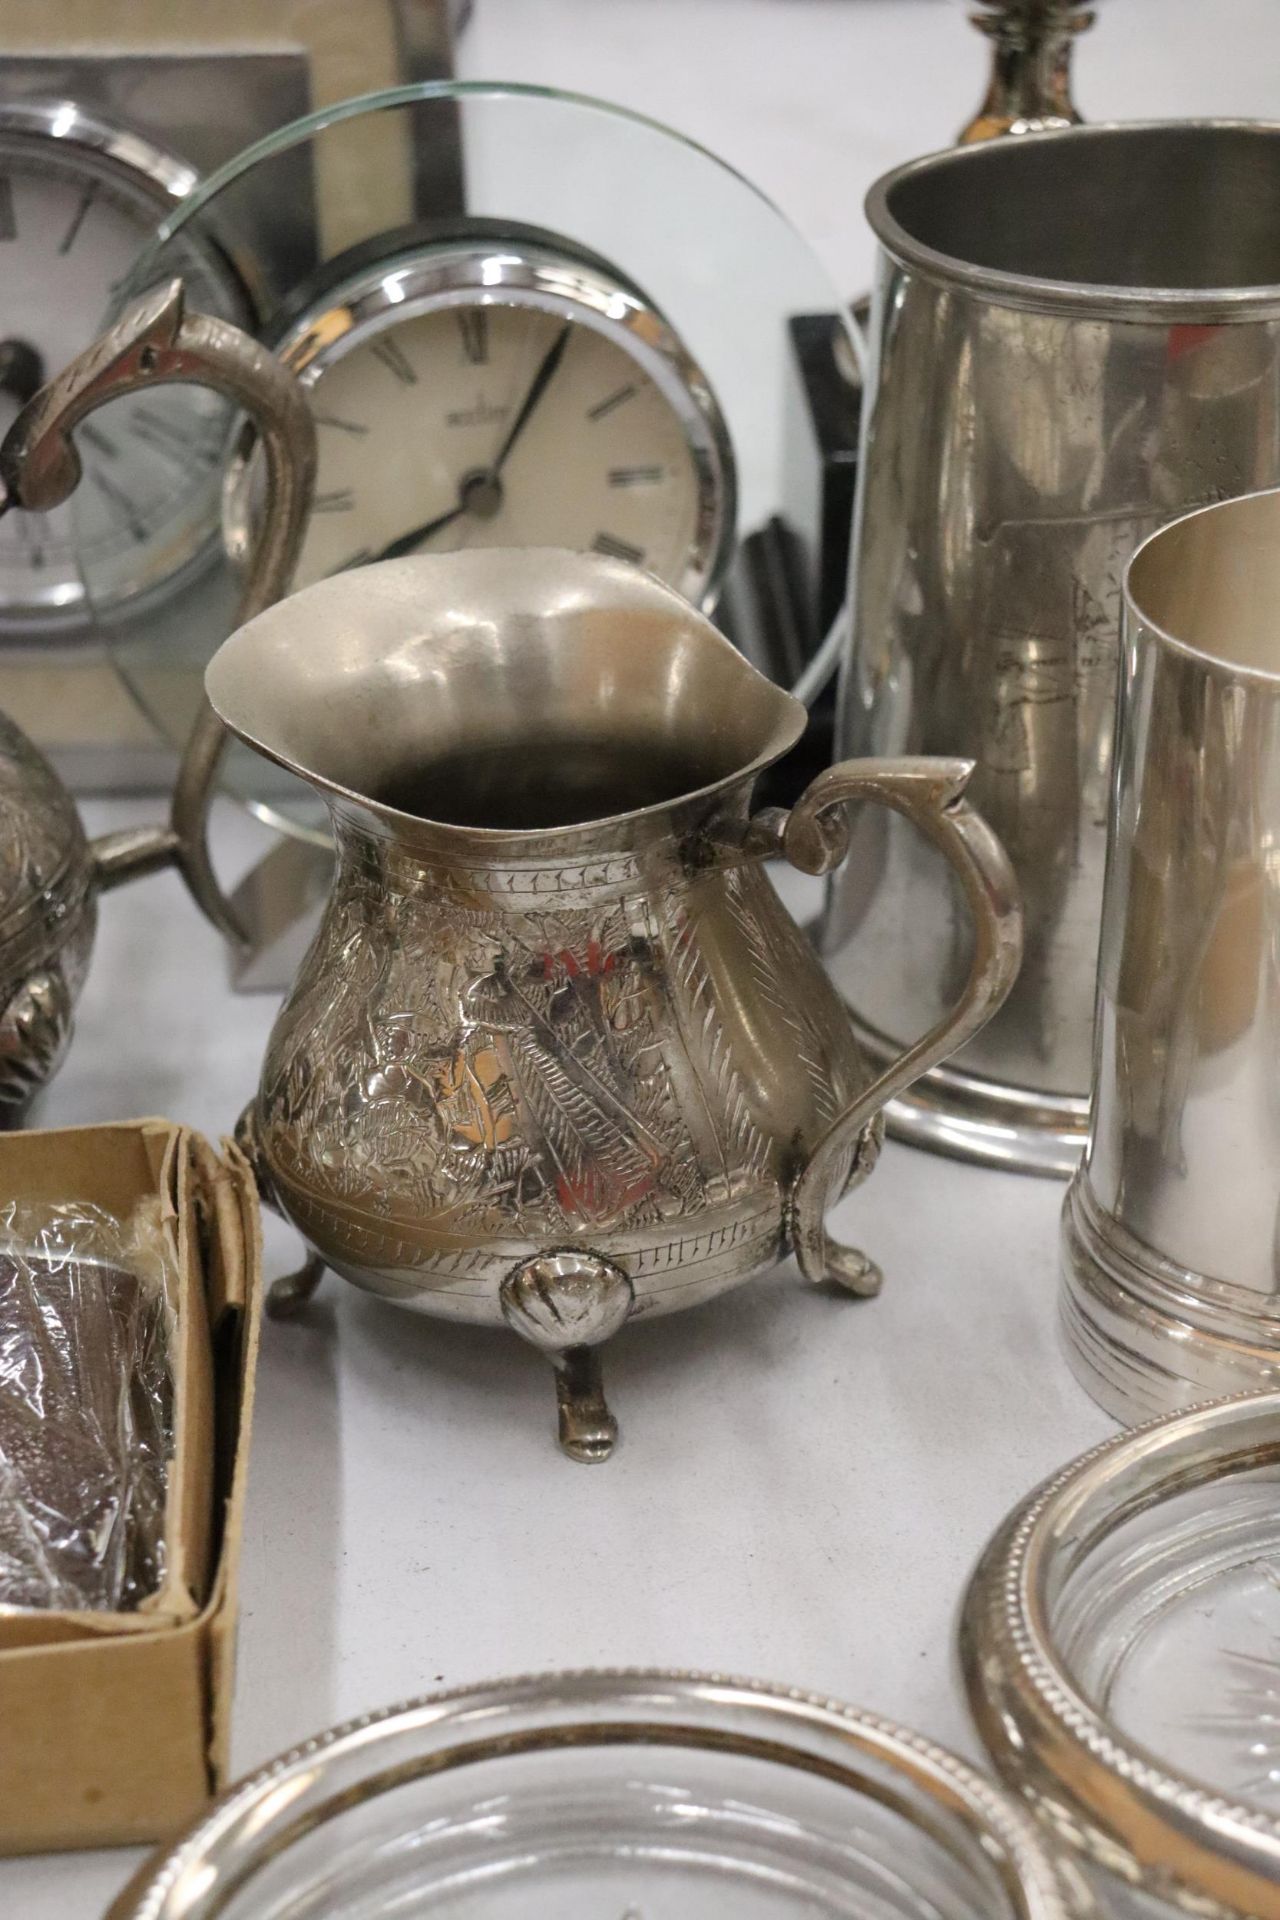 A QUANTITY OF SILVER PLATED ITEMS TO INCLUDE A TEAPOT, TANKARDS, A TROPHY, HIP FLASK, CLOCKS, ETC - Image 6 of 12